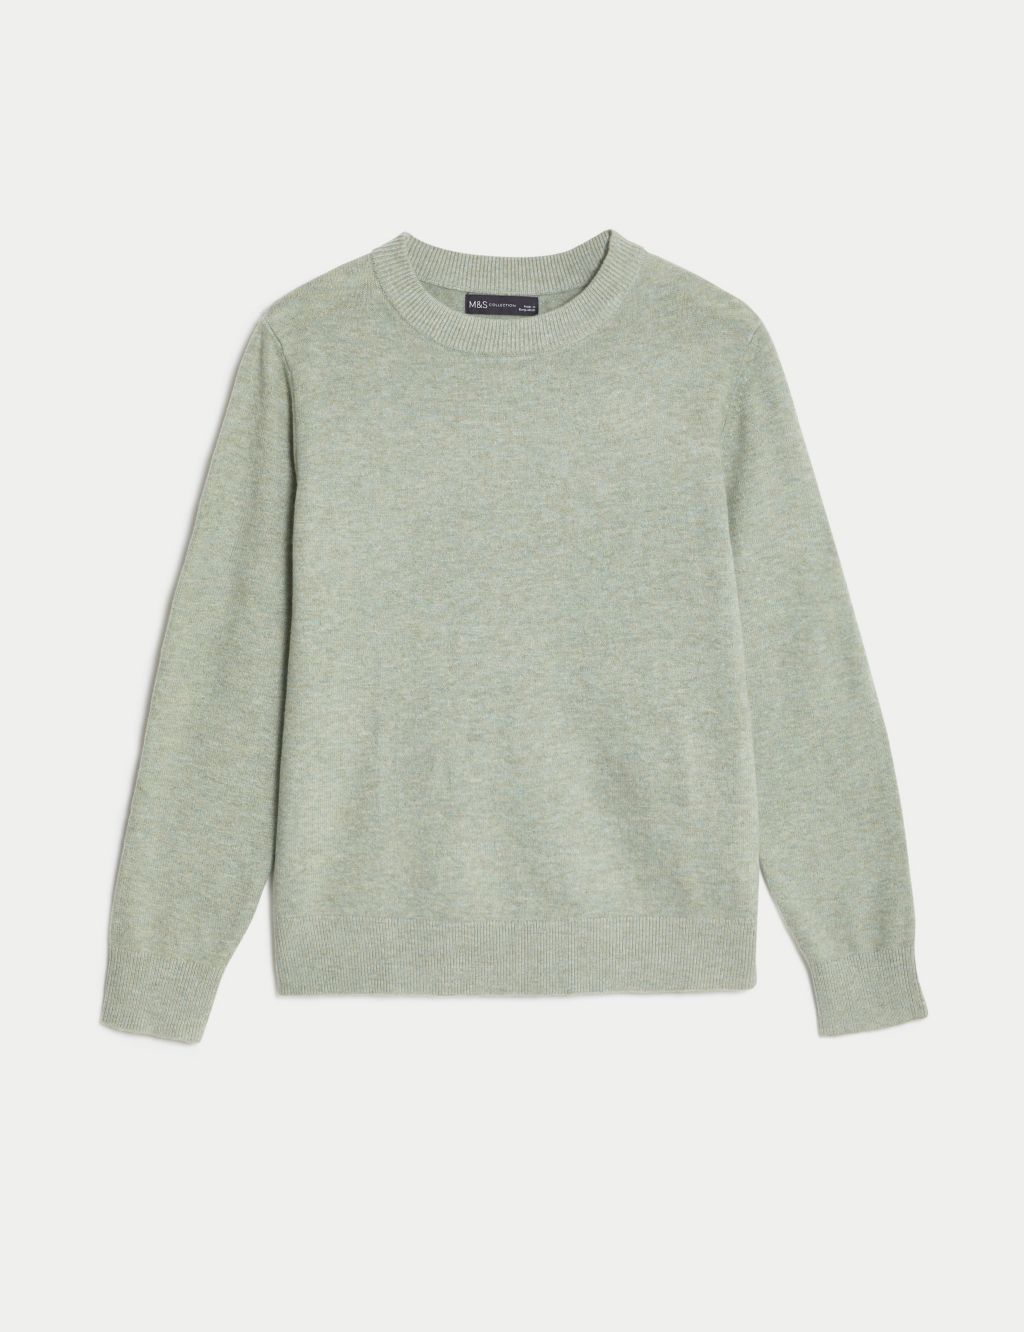 Recycled Blend Crew Neck Jumper image 2